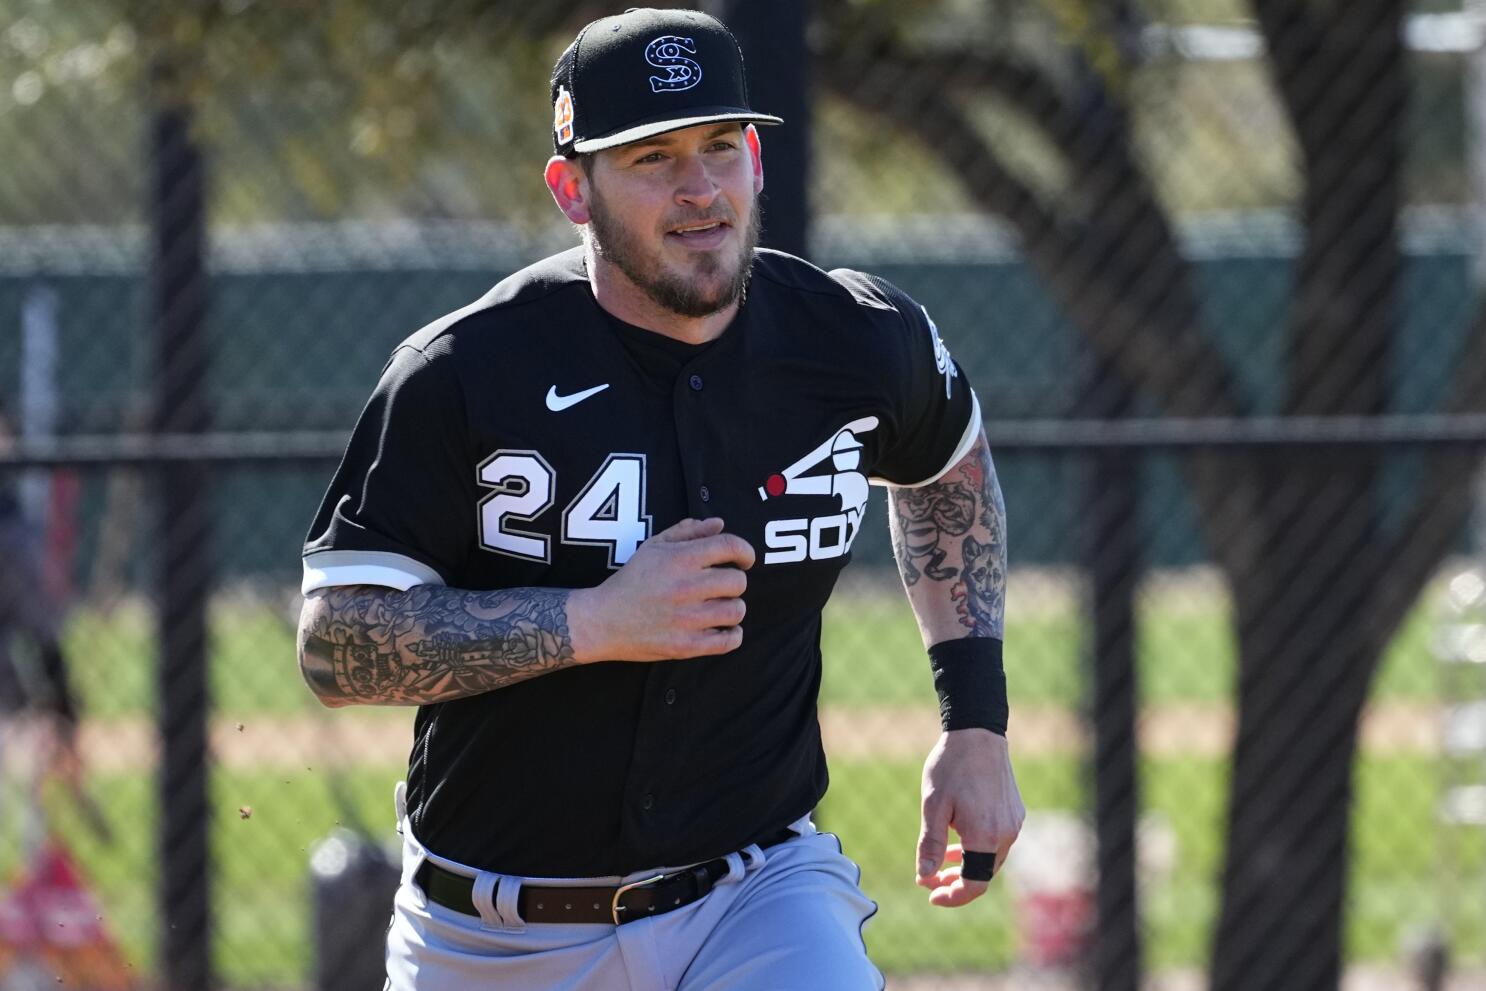 White Sox catcher Yasmani Grandal pushes back on accusations team